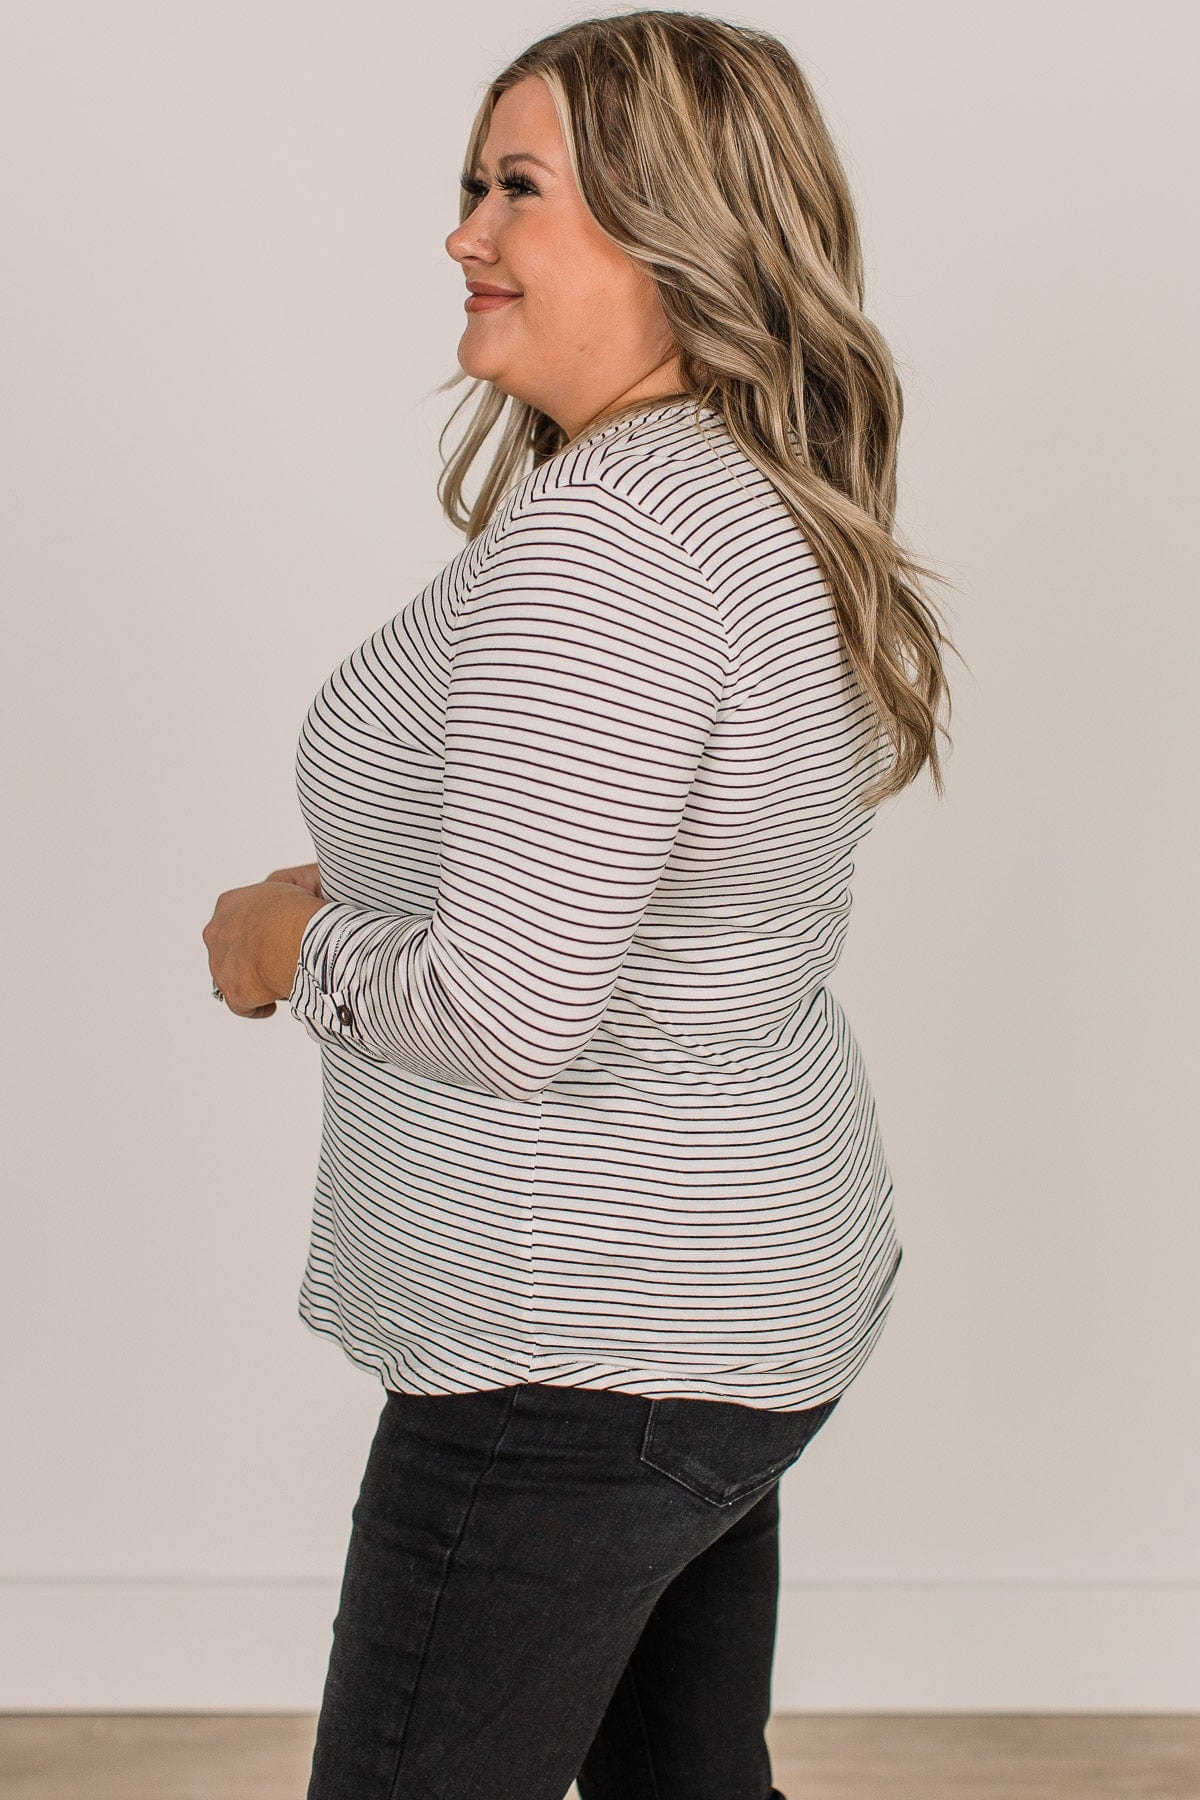 Don't Mention It Striped Top- Ivory & Black